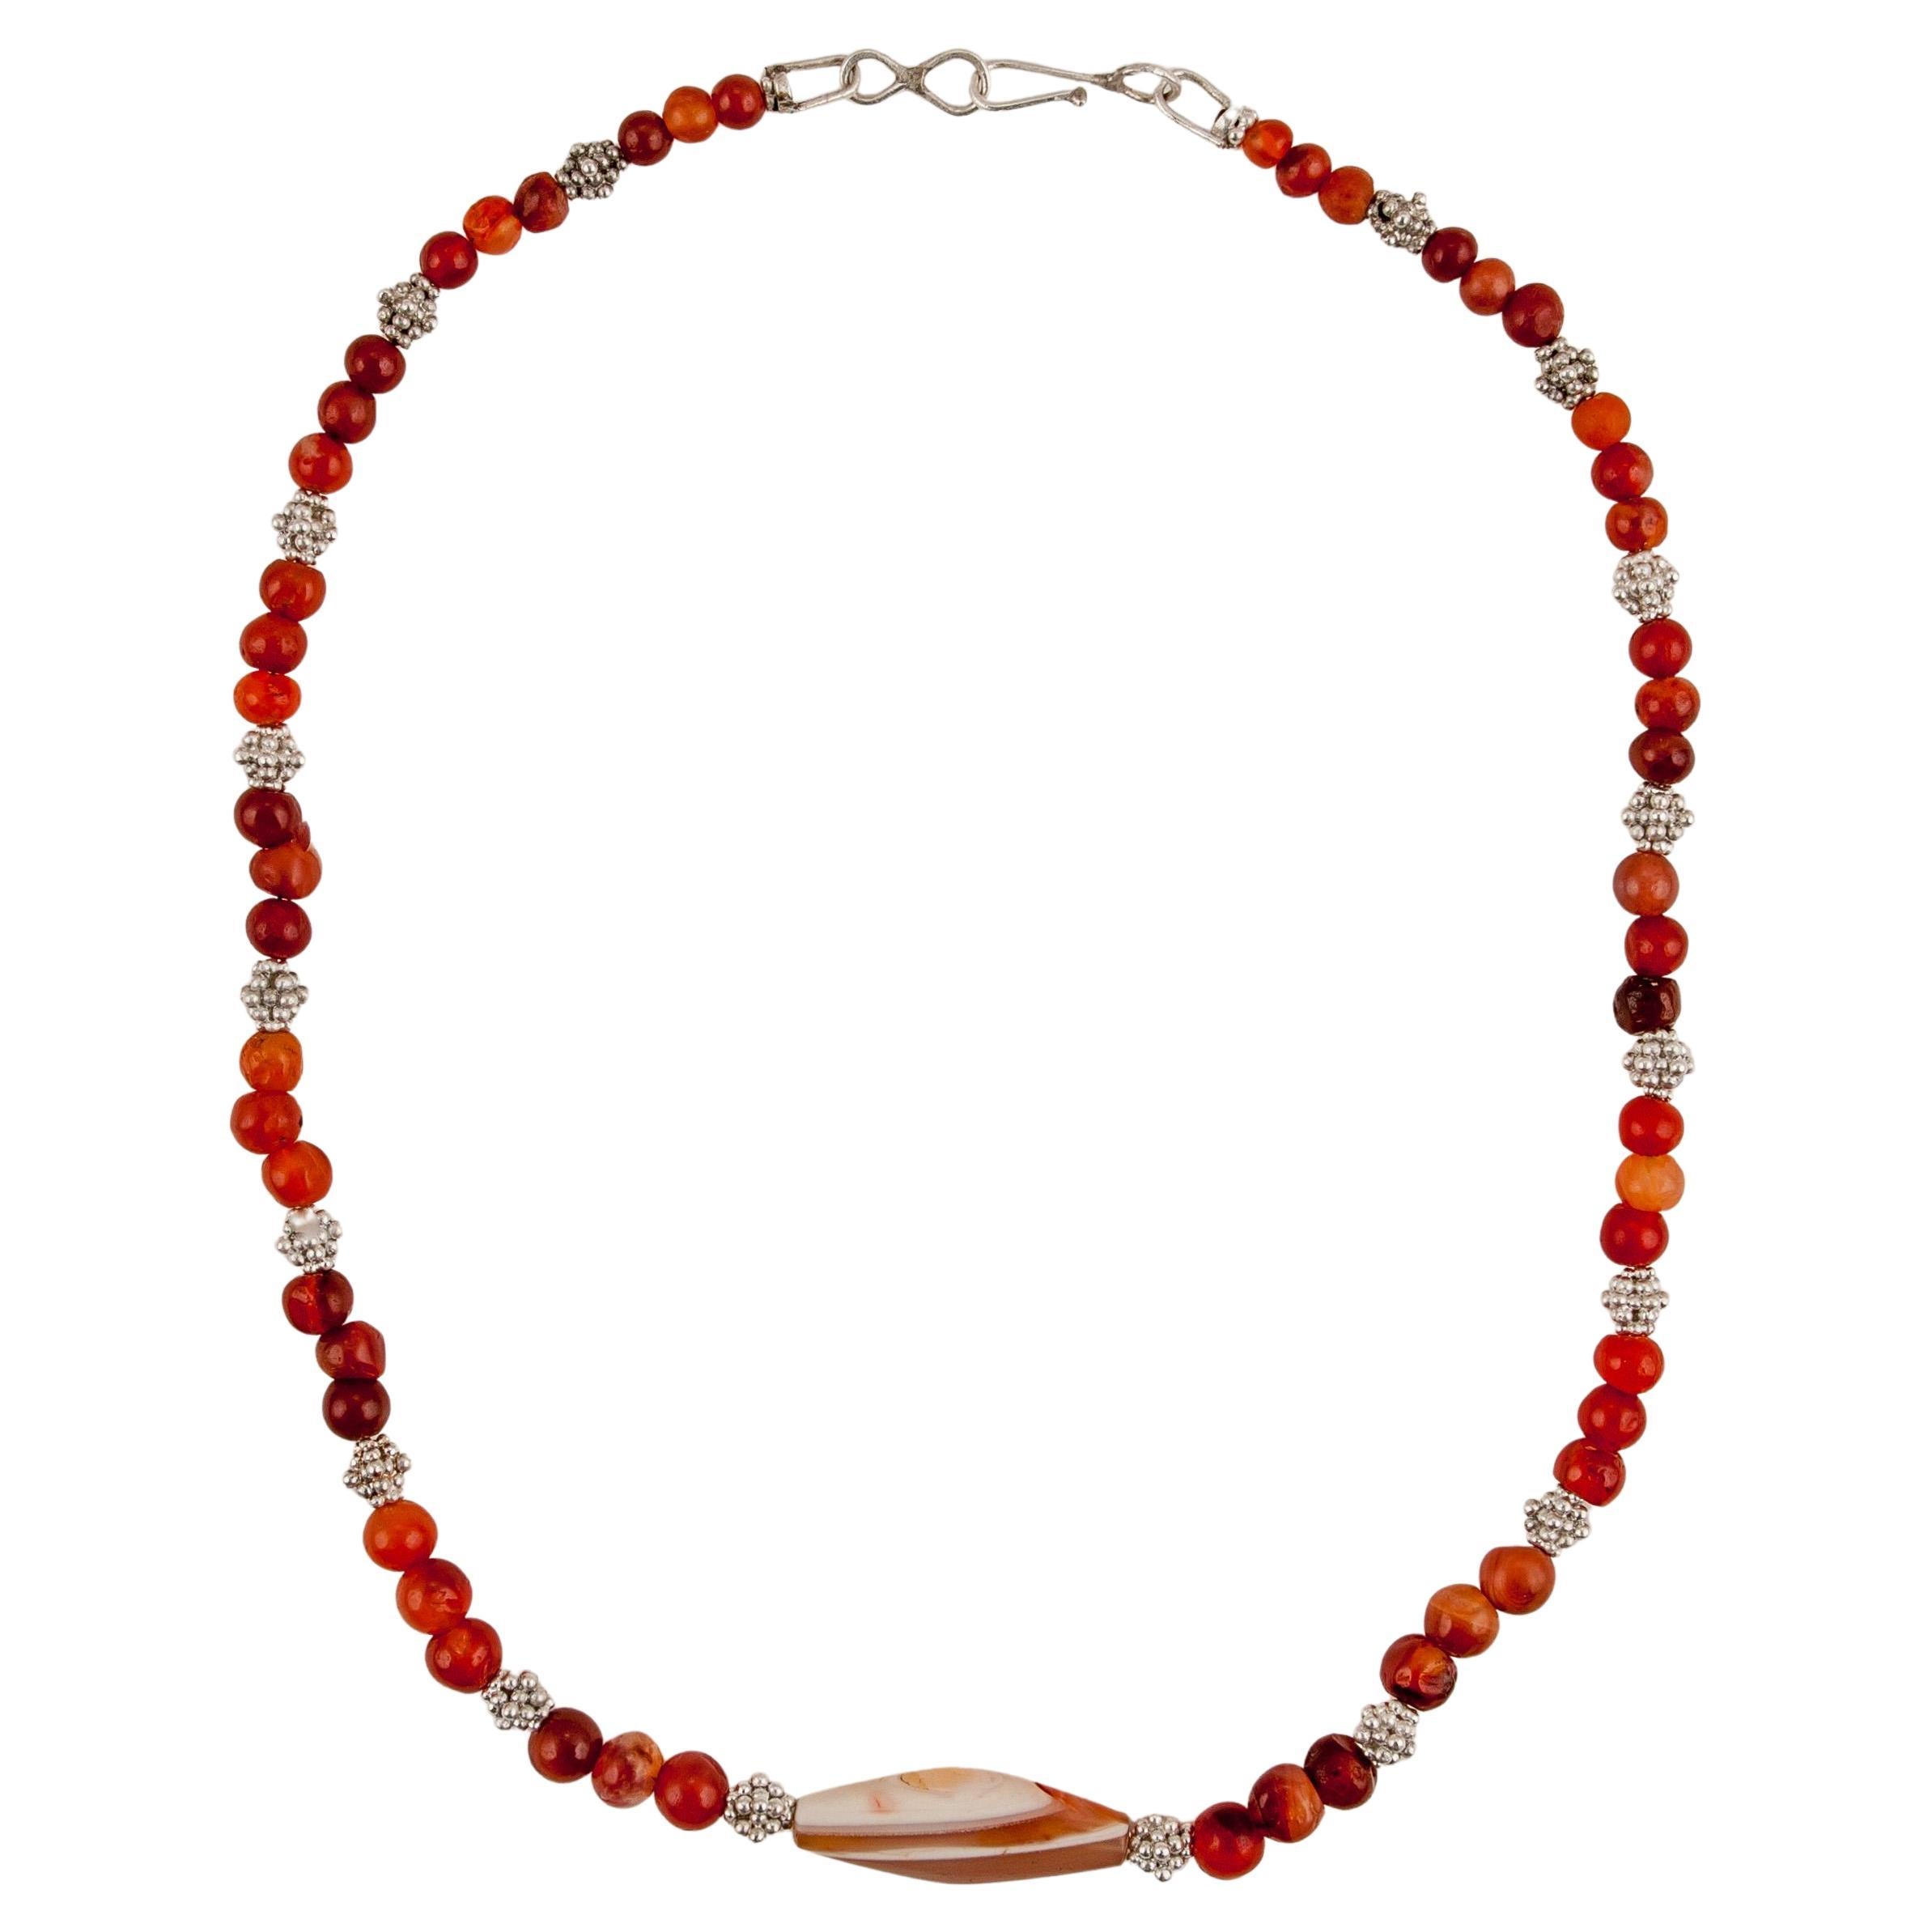 Ancient Carnelian Beads with Agate Centerpiece and Granulated Fine Silver Beads For Sale